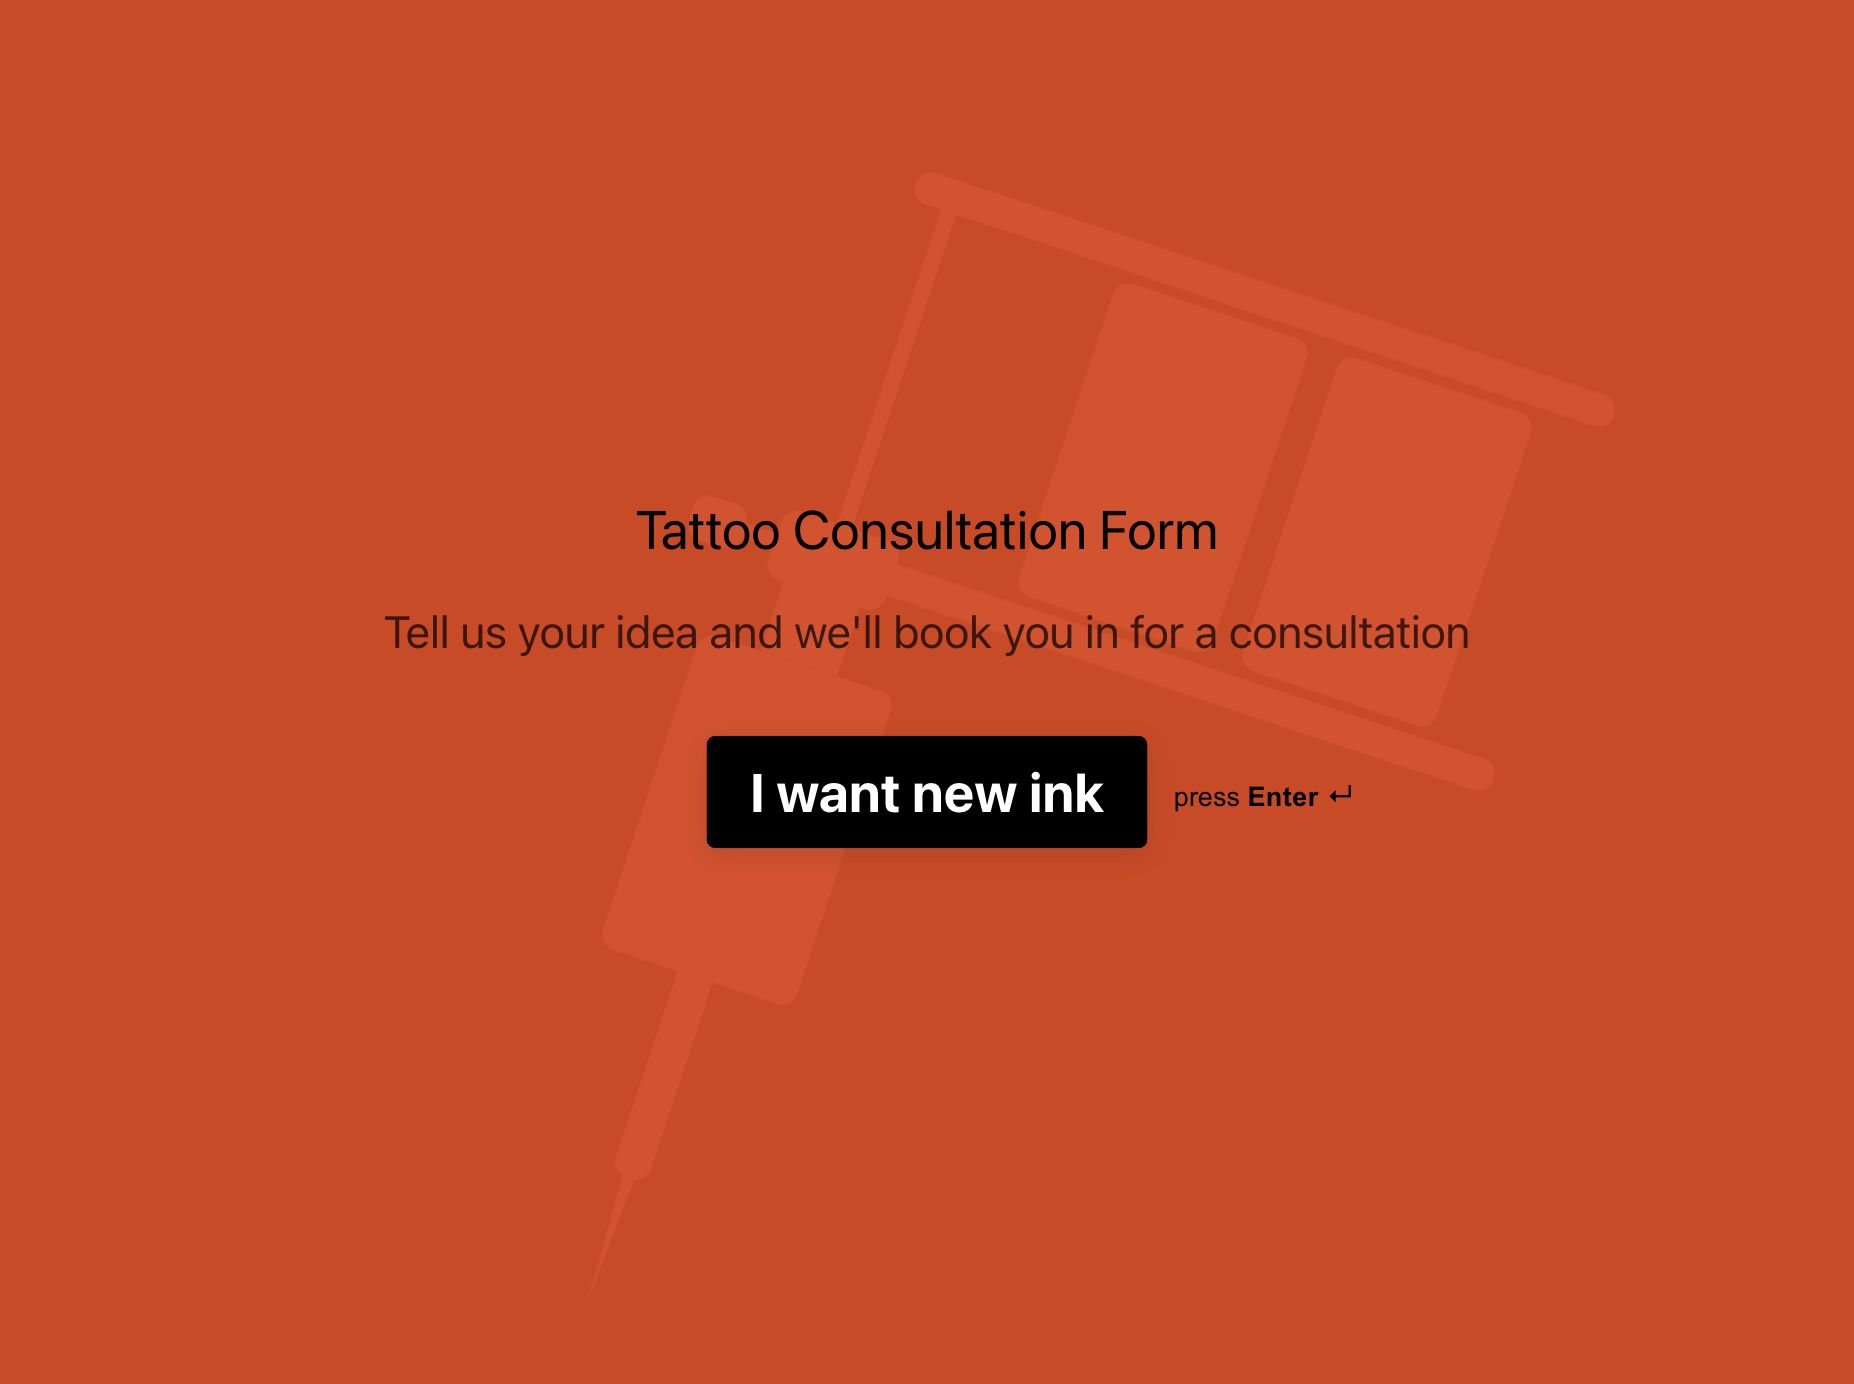 Share more than 145 free tattoo consultation super hot